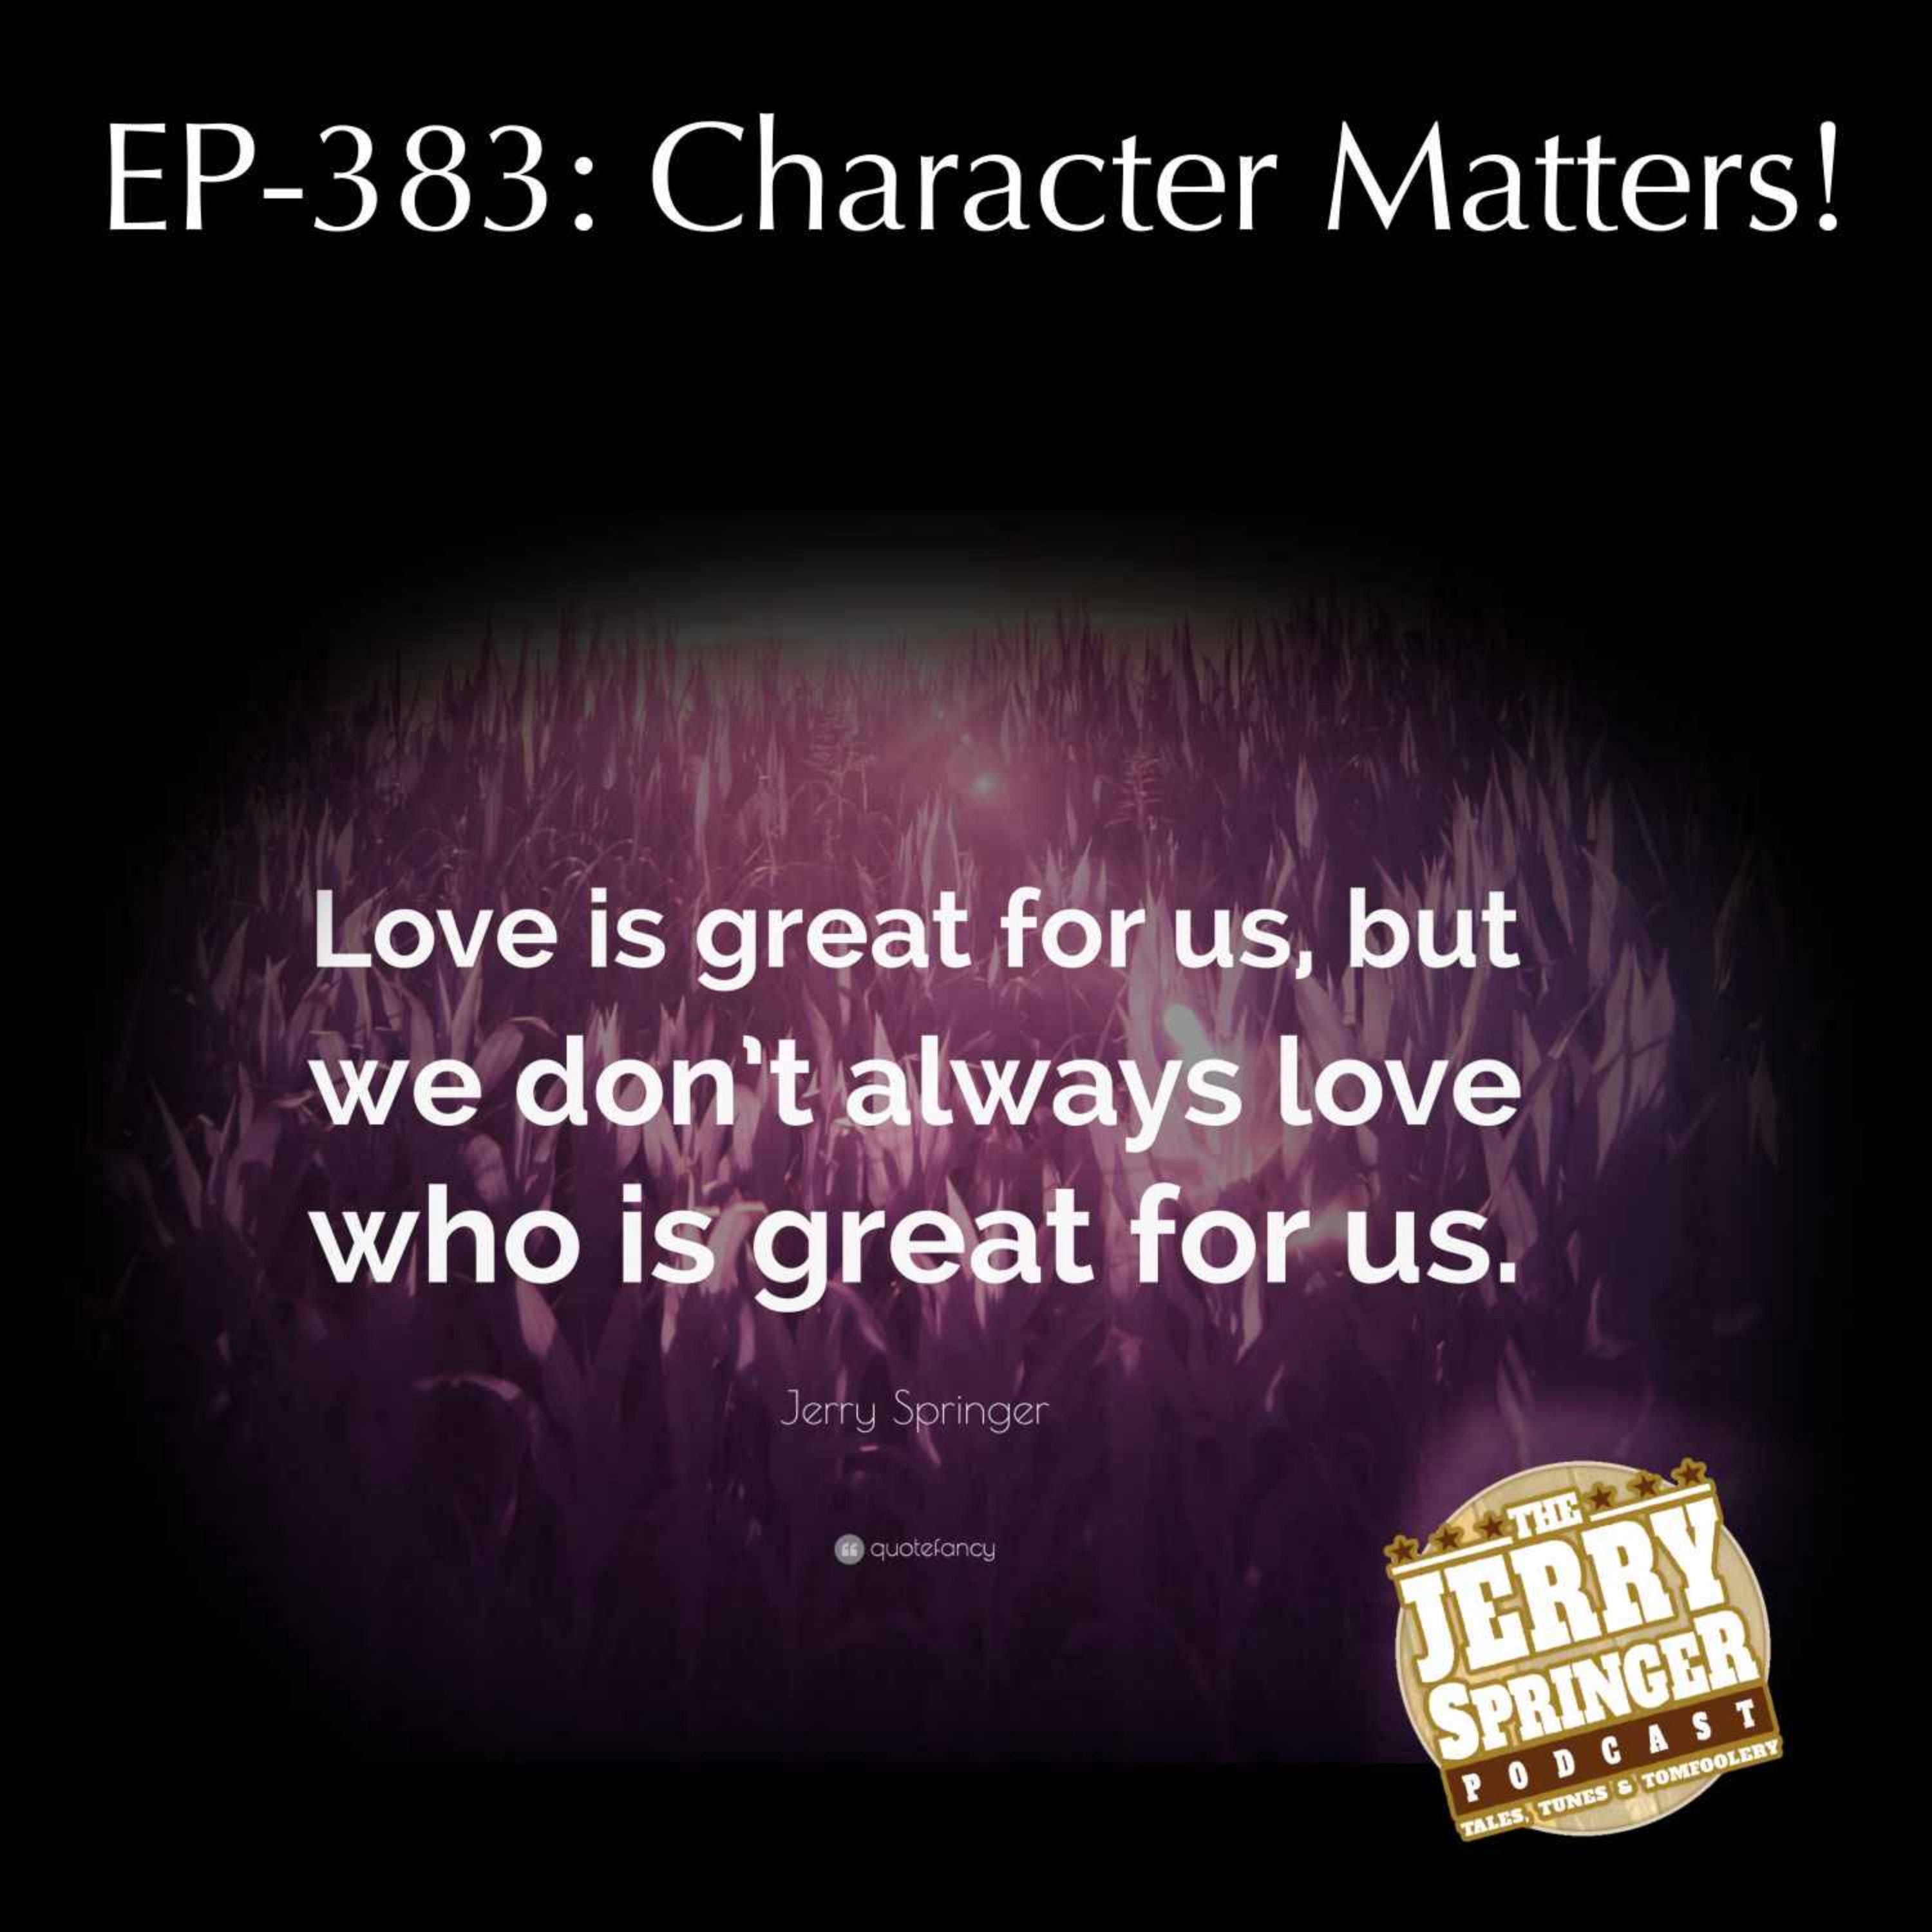 Character Matters! EP - 383